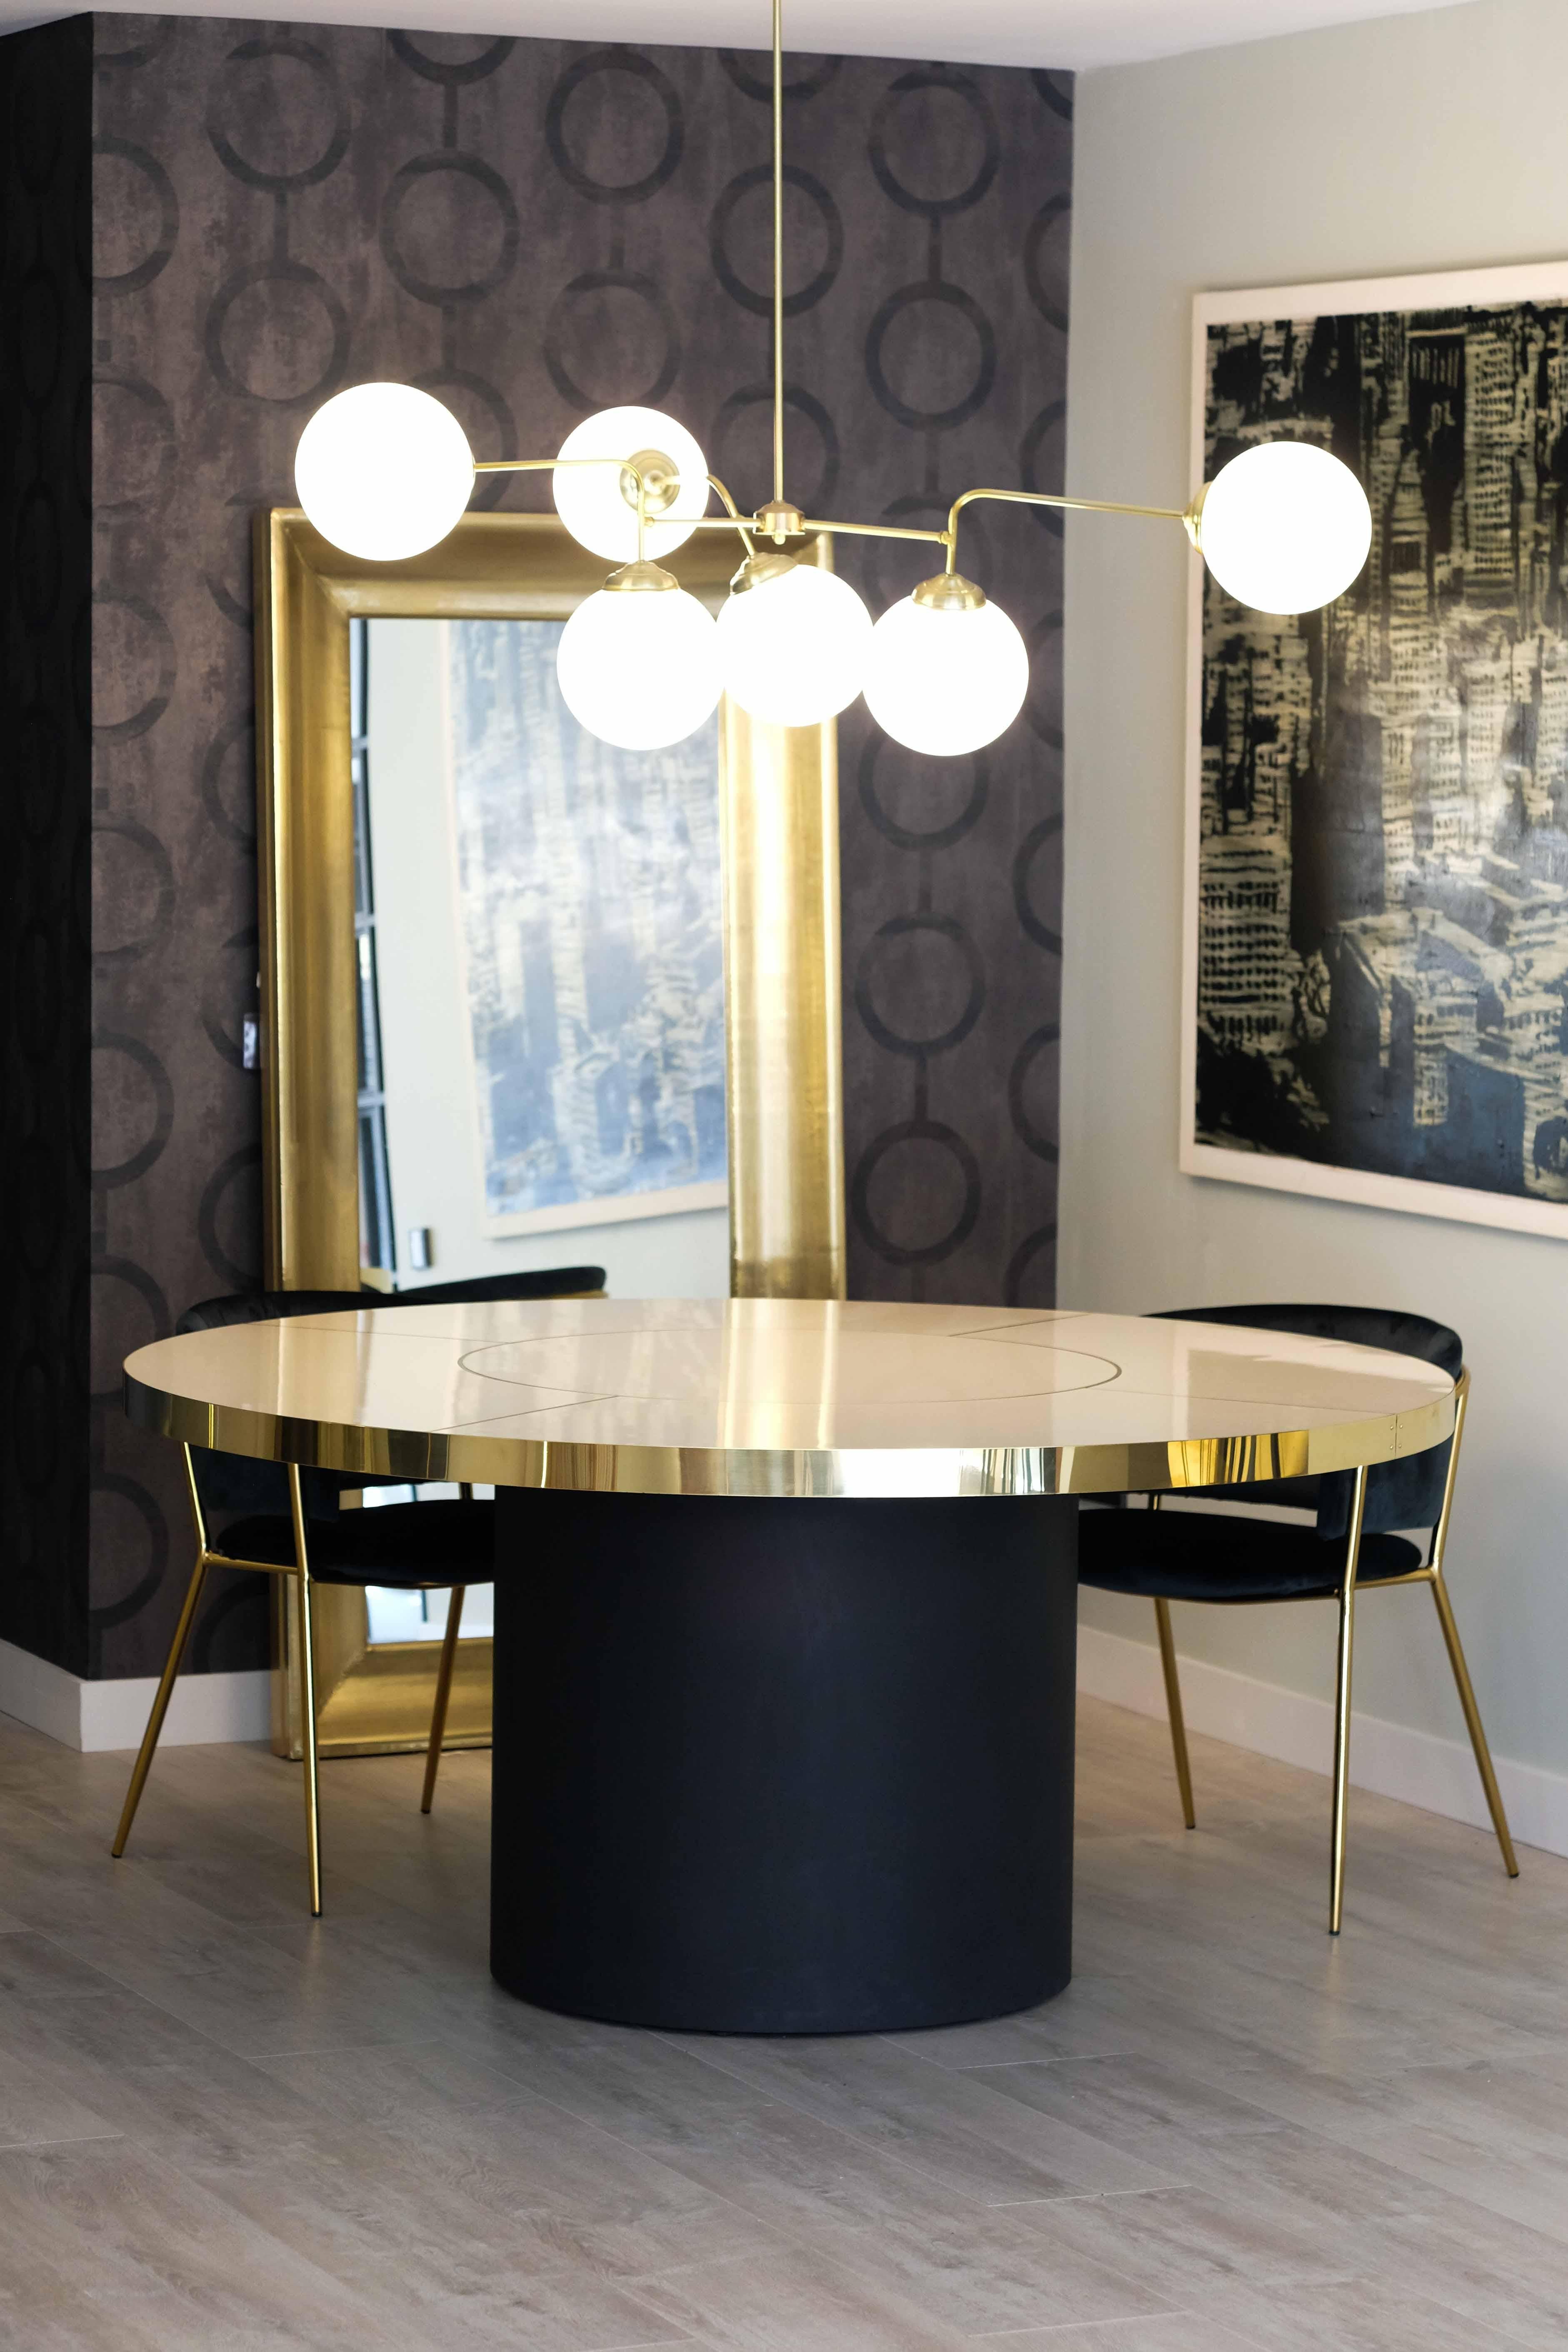 Retro Design Round Dining Table Palm Springs Style High Gloss Laminated & Brass Details Medium Size

Discover our incredible collection of retro-style design tables inspired by the iconic decoration of the 1950s, 60s, and 70s of Palm Springs in